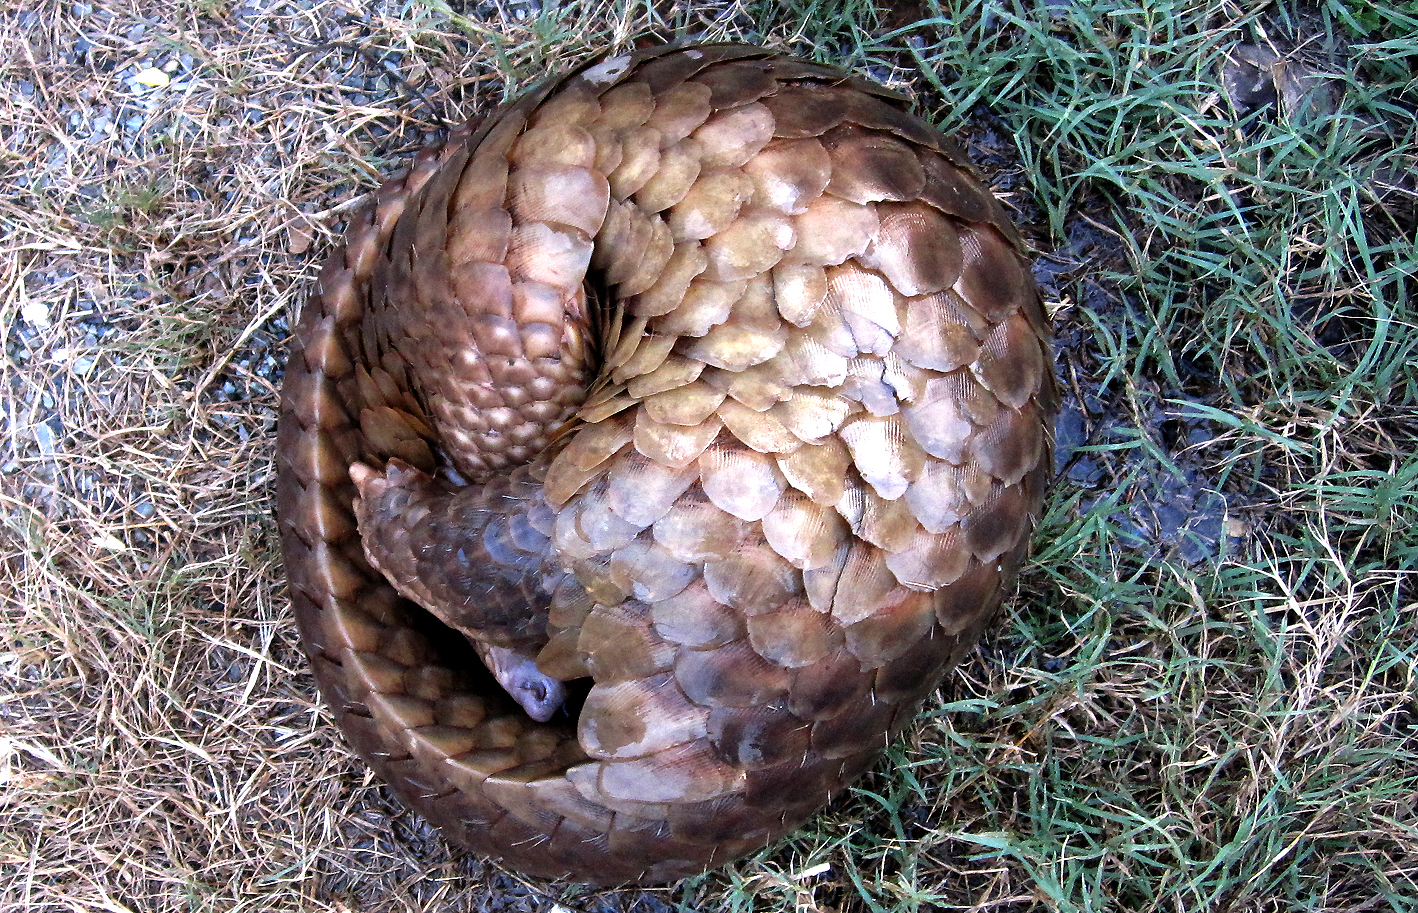 Why are people eating pangolins?